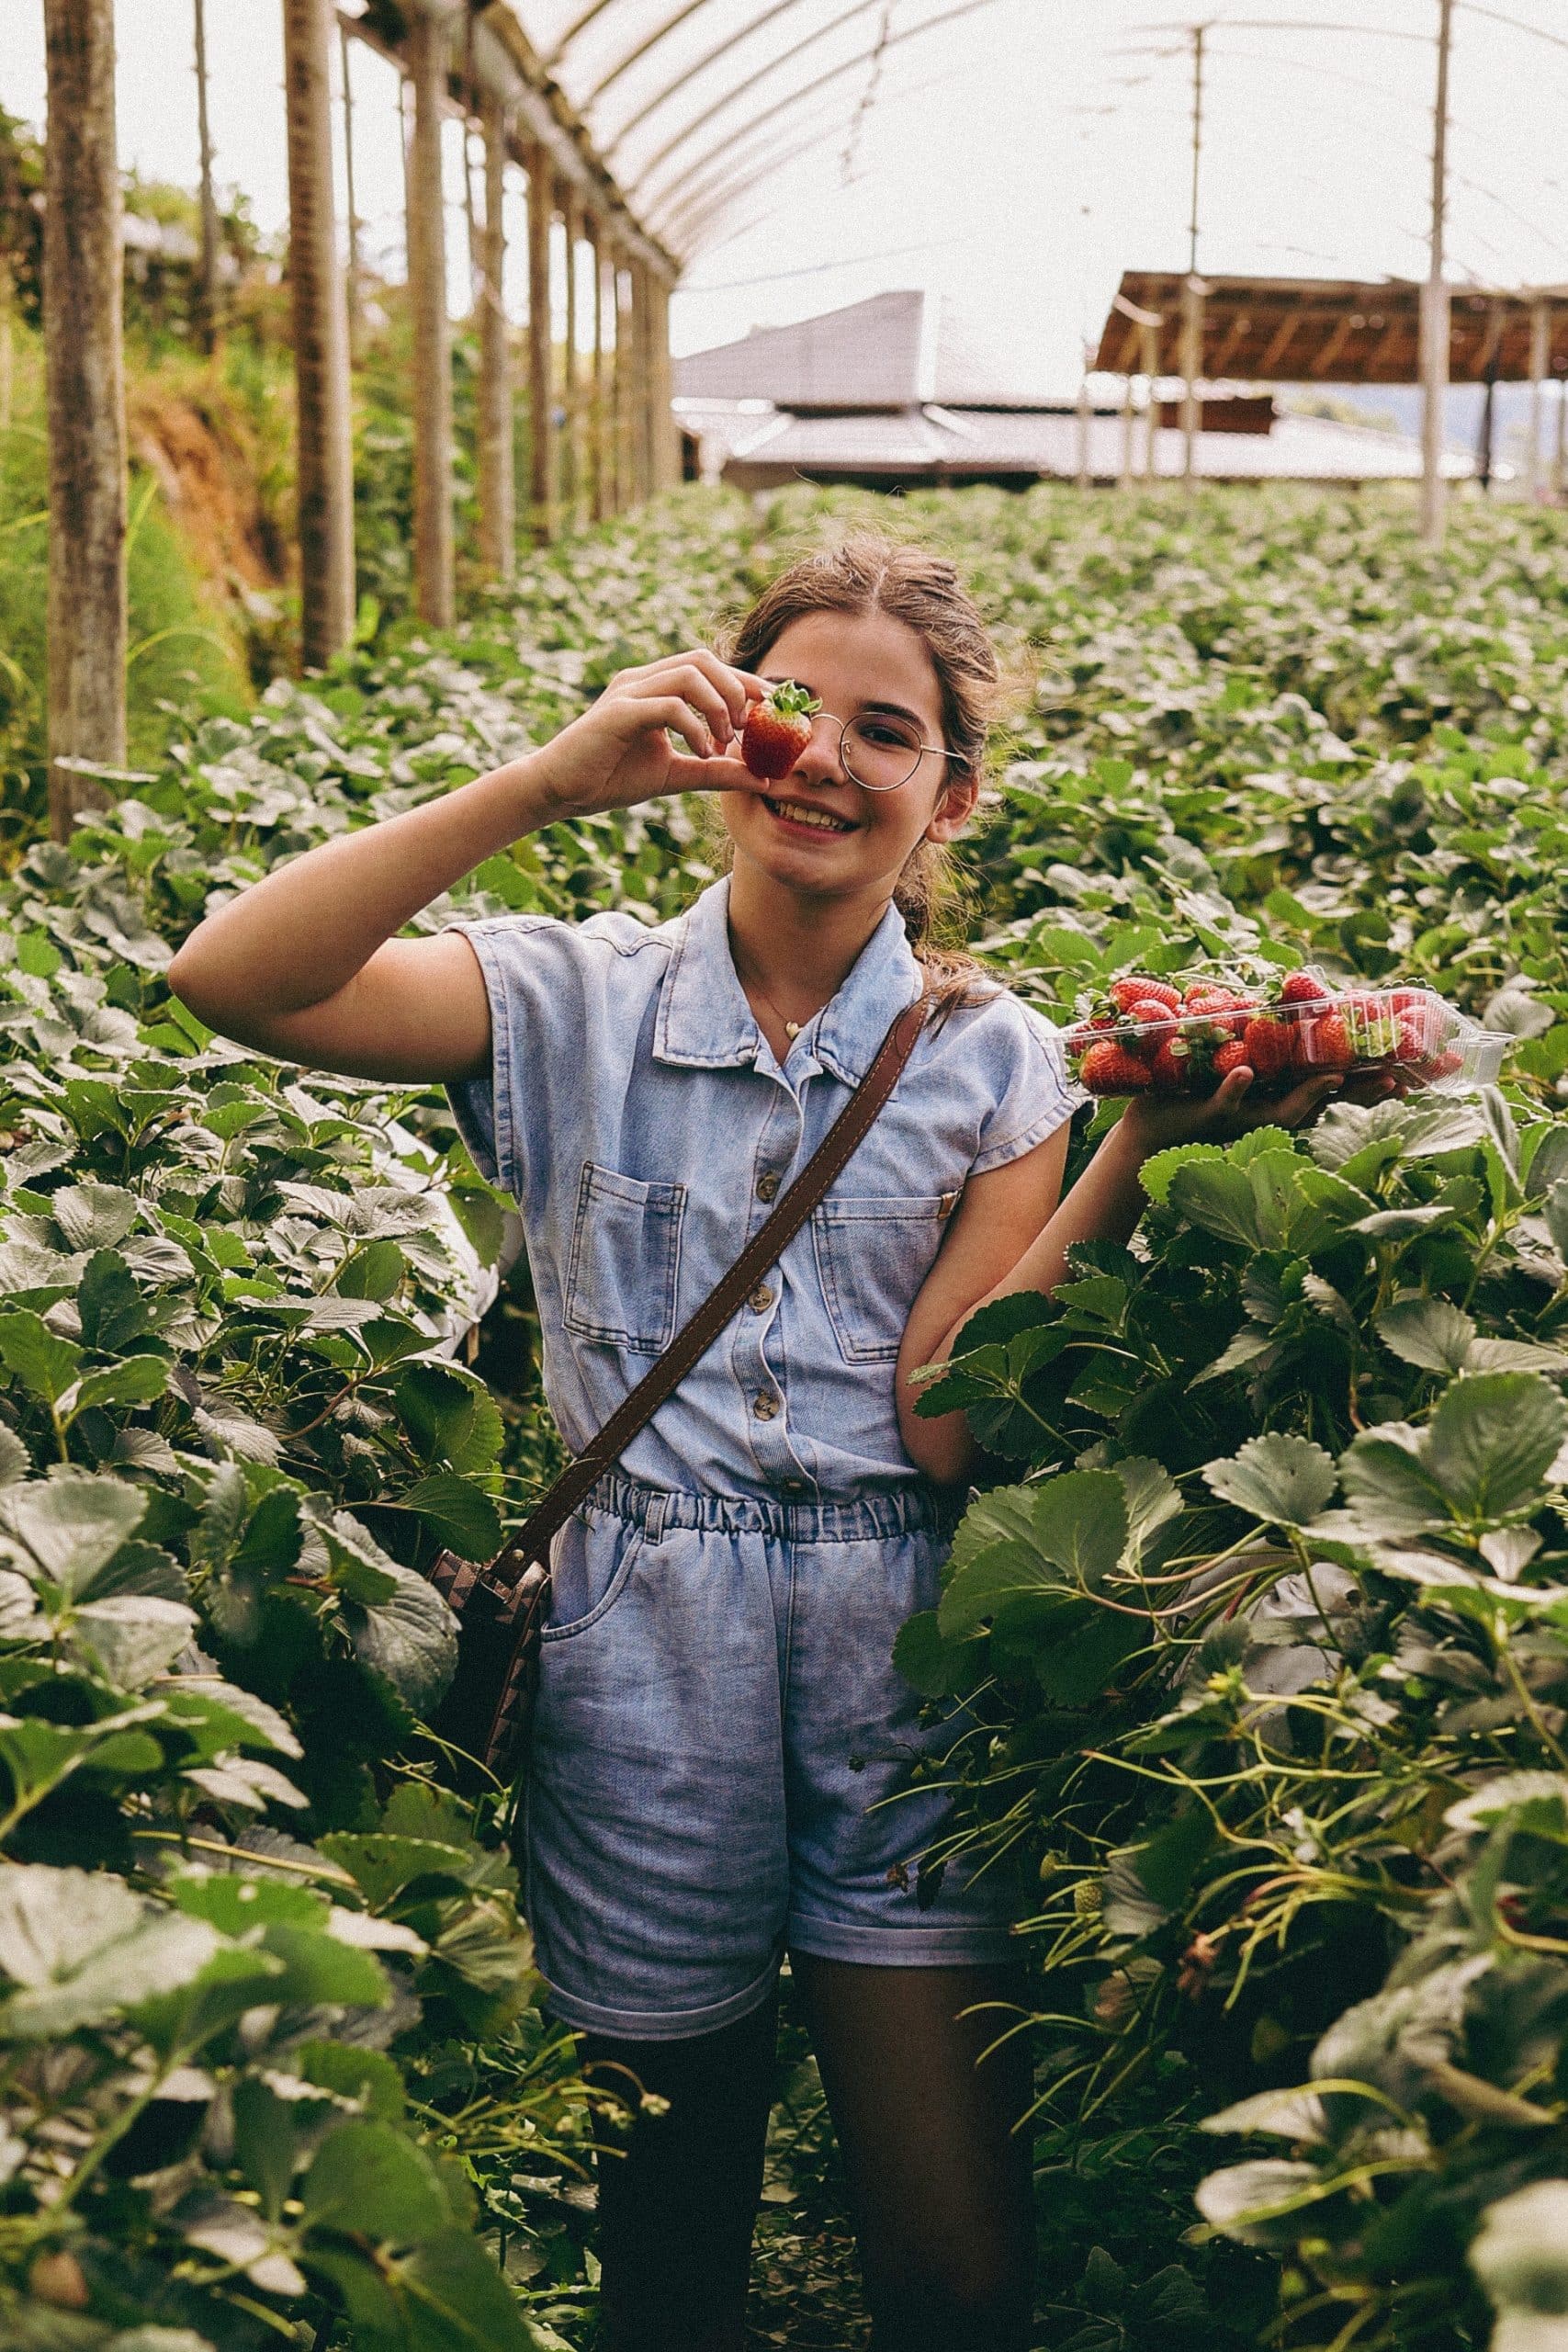 A young female picking her own strawberries